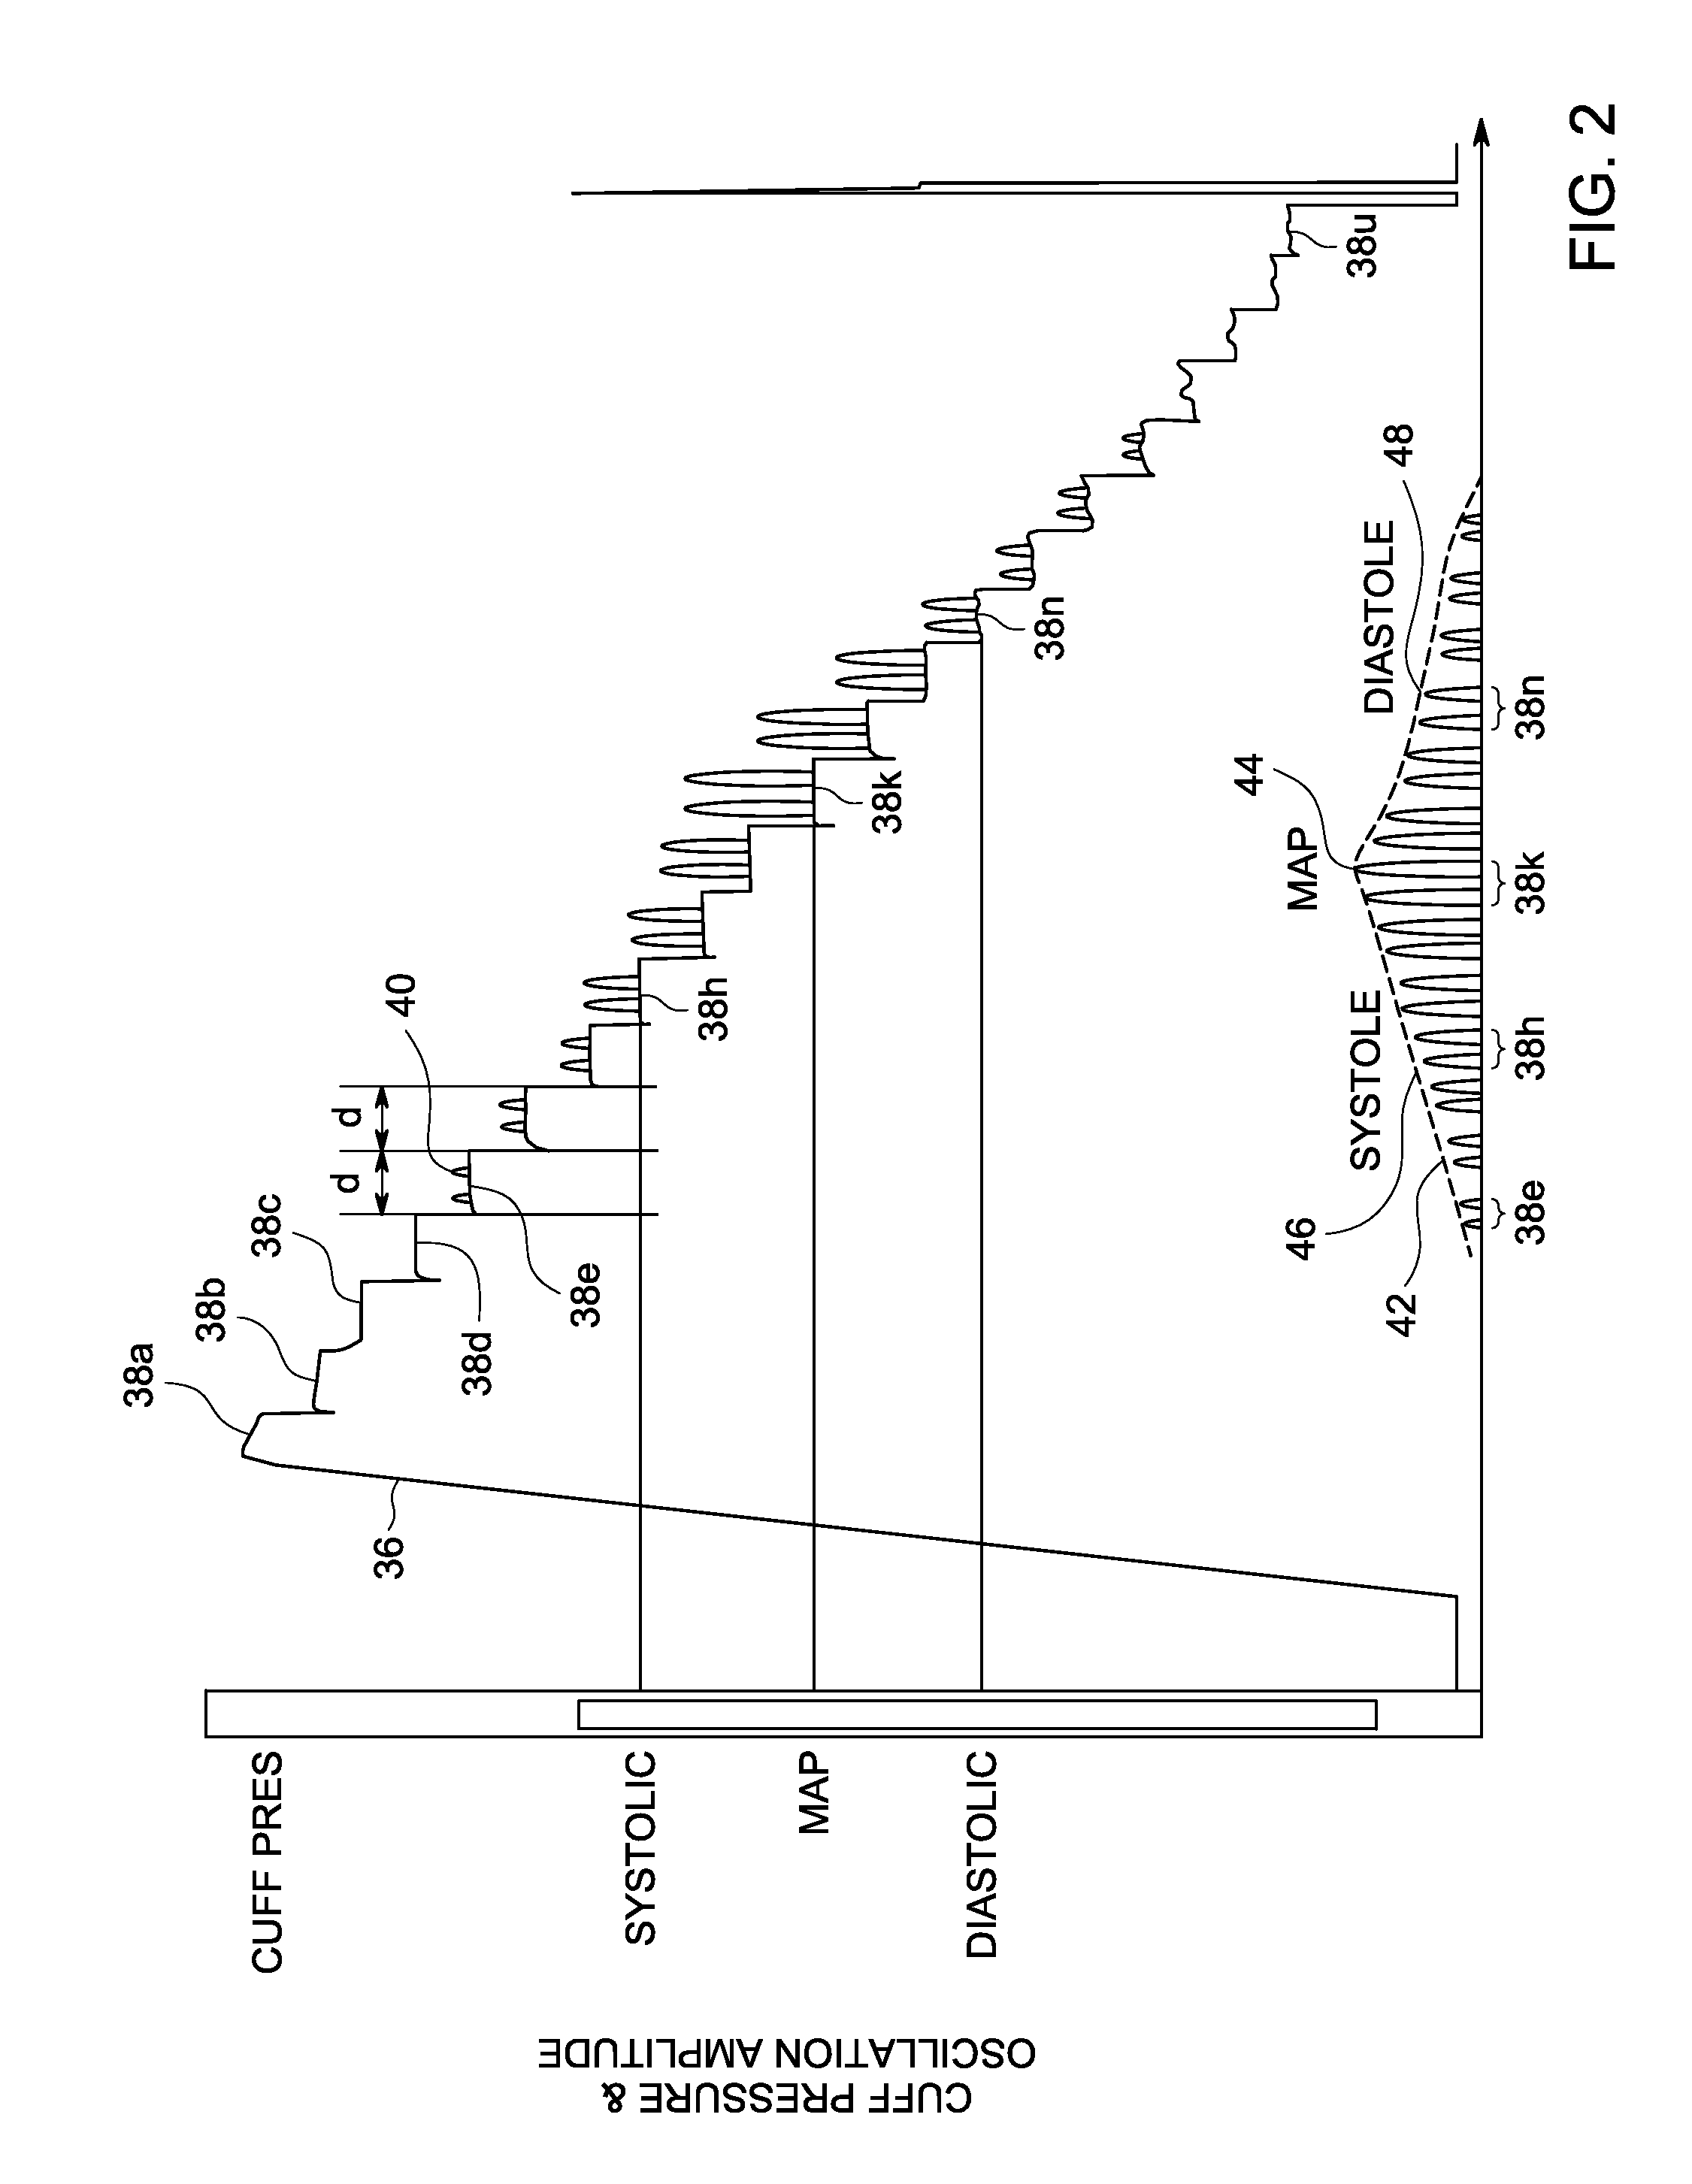 Use of the frequency spectrum of artifact in oscillometry